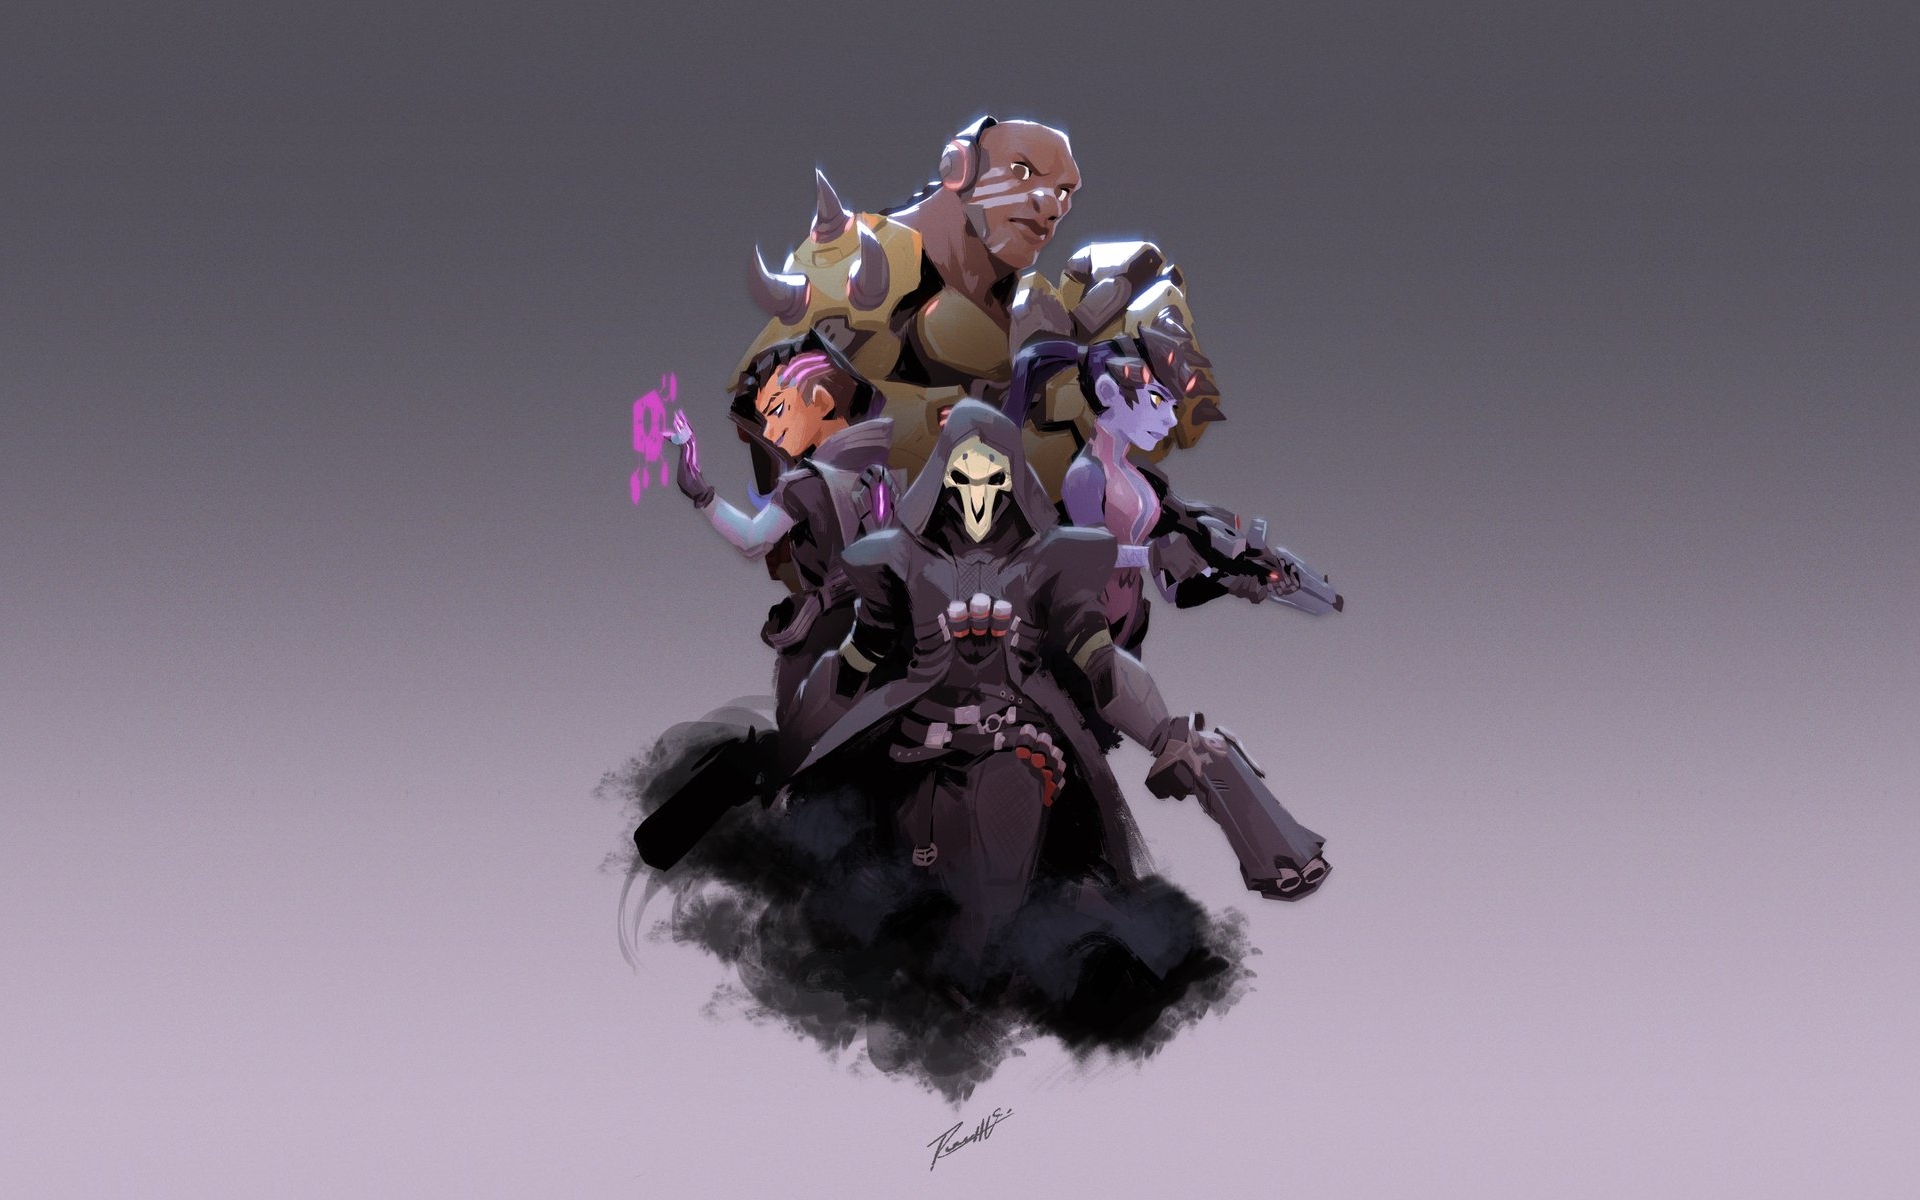 General 1920x1200 Overwatch Doomfist (Overwatch) Widowmaker (Overwatch) Sombra (Overwatch) Reaper (Overwatch) Affiliation: Talon video game characters